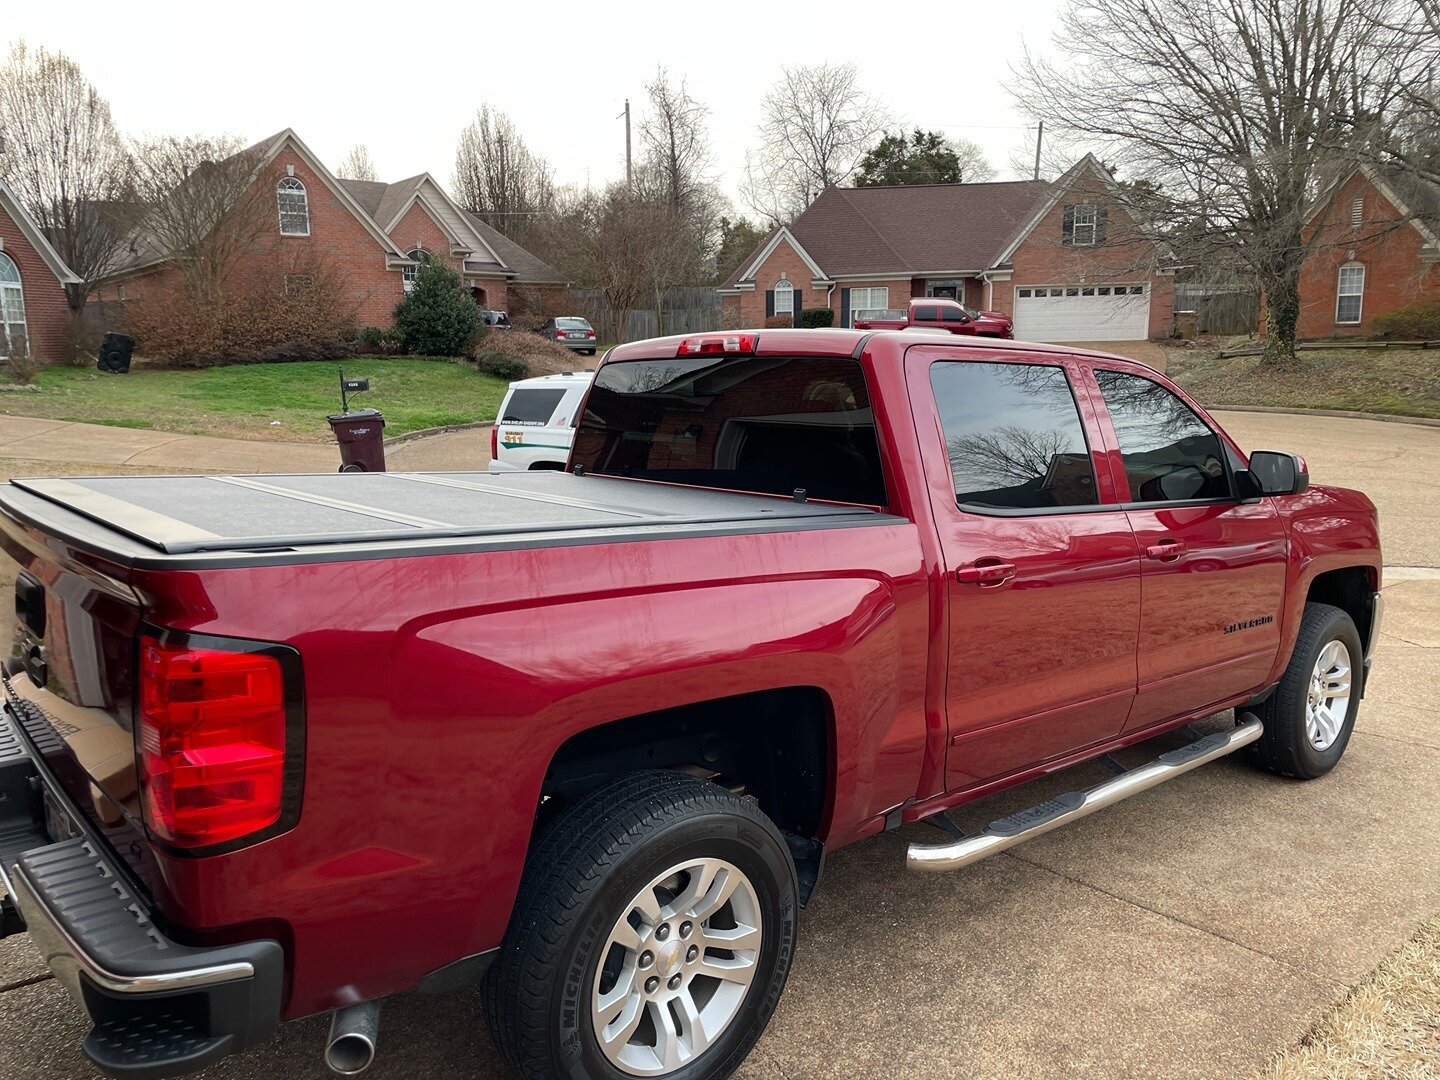 Got the goods? Good. Because we got the tonneau cover to keep them safe and dry!

#ProvenGround
#liftedtrucks
#TrucksDaily
#Trucks
#S112600